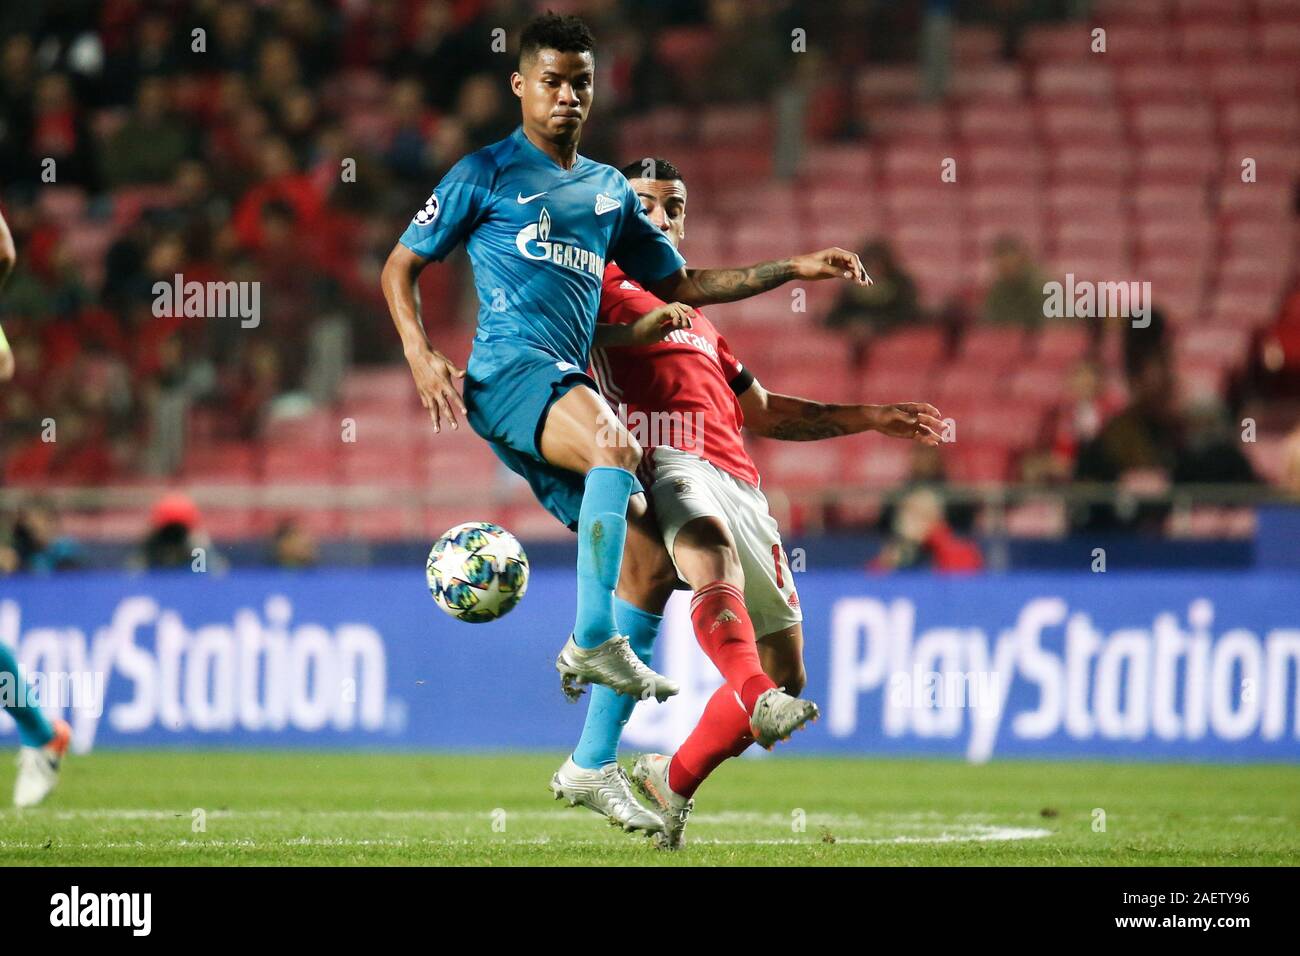 Saint Petersburg, Russia. 10th Dec, 2019. Chiquinho (Francisco Leonel Lima Silva Machado) (R) of Benfica and Wilmar Barrios (L) of Zenit are seen in action during the UEFA Champions League group G match between SL Benfica Lisbon and Zenit at Gazprom Arena in St. Petersburg.(Final score; SL Benfica Lisbon 3:0 Zenit) Credit: SOPA Images Limited/Alamy Live News Stock Photo